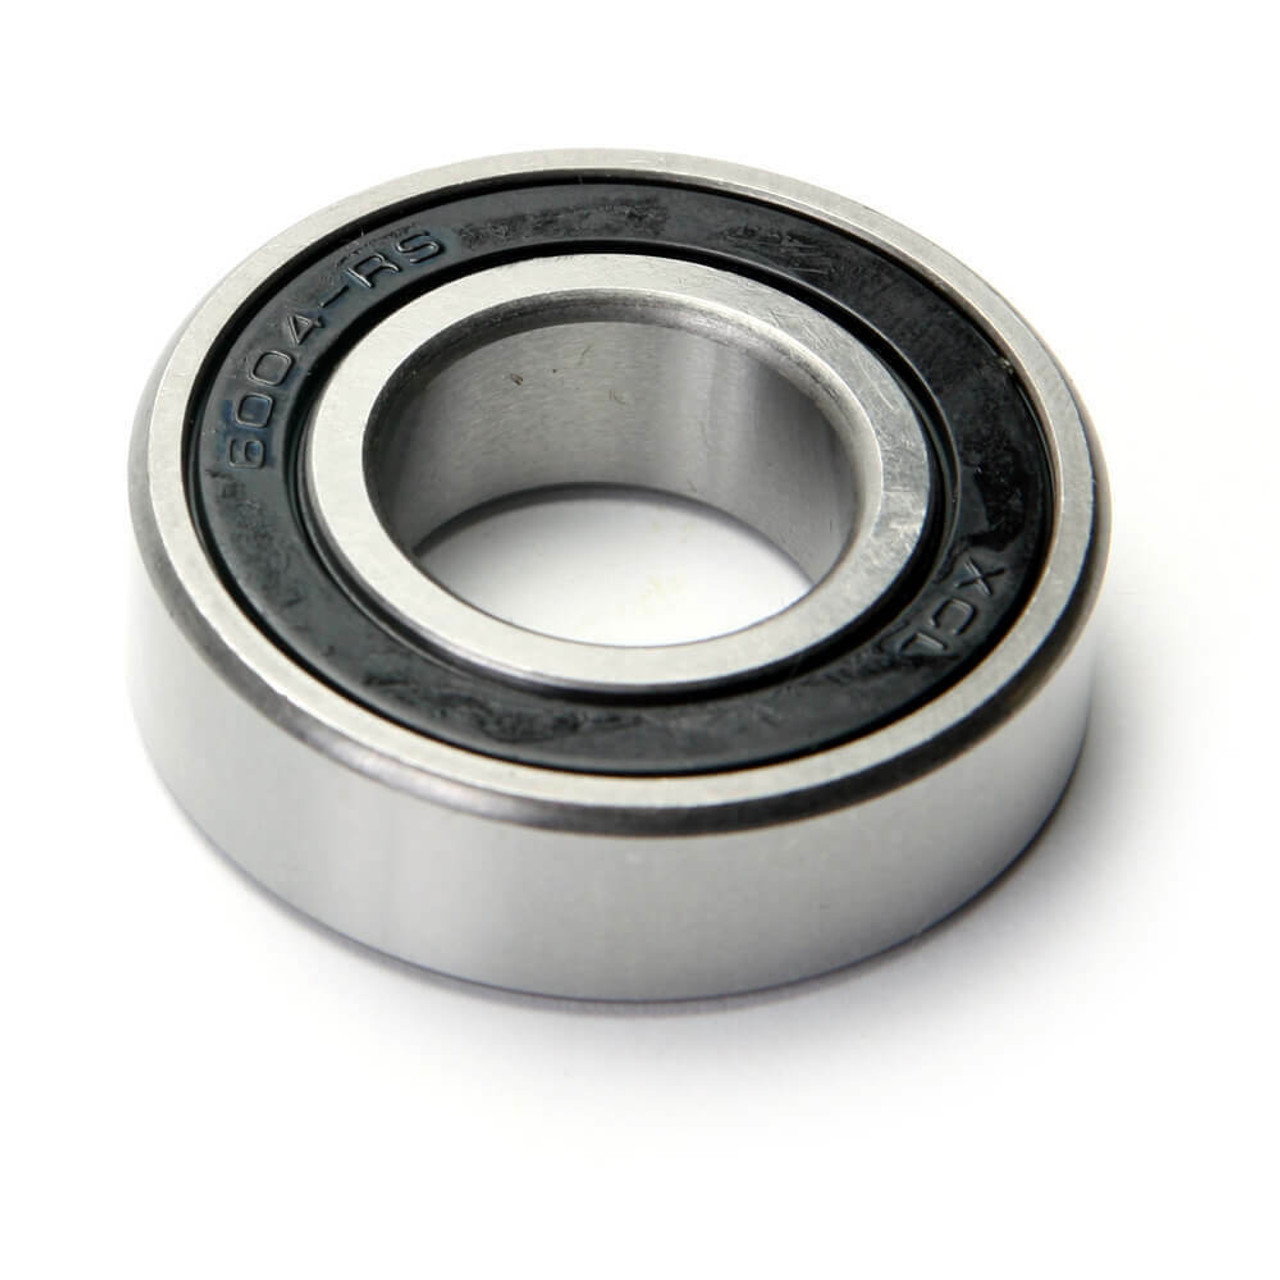 GEARBOX BEARING 6004-2RS FOR 150cc GY6 MOTORS